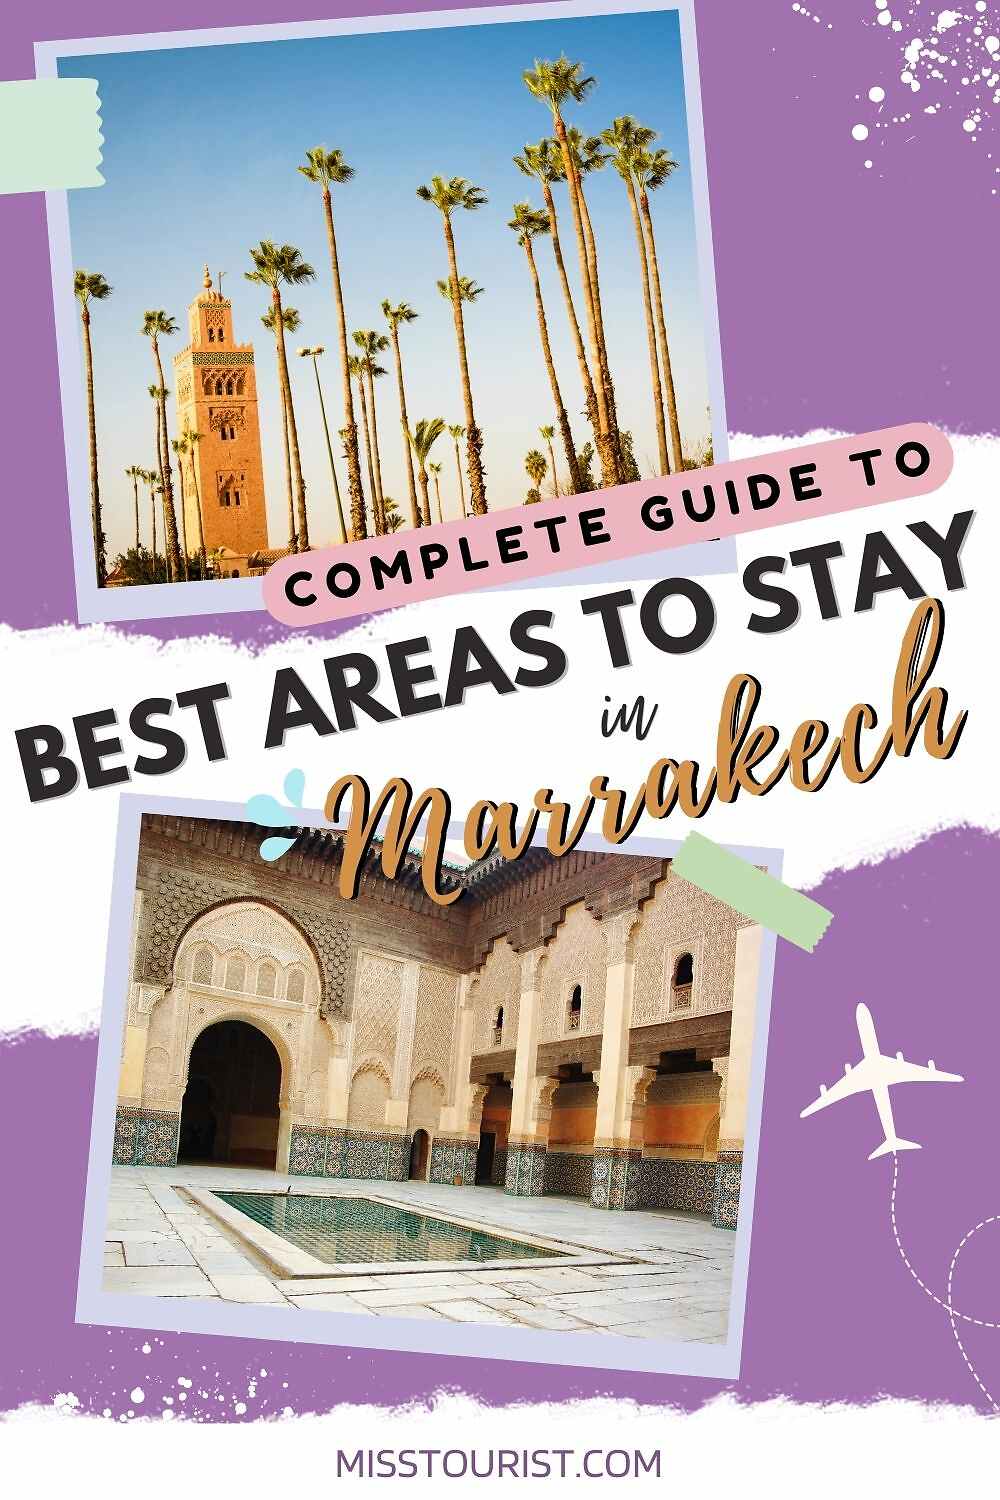 best areas to stay in marrakech pin 2